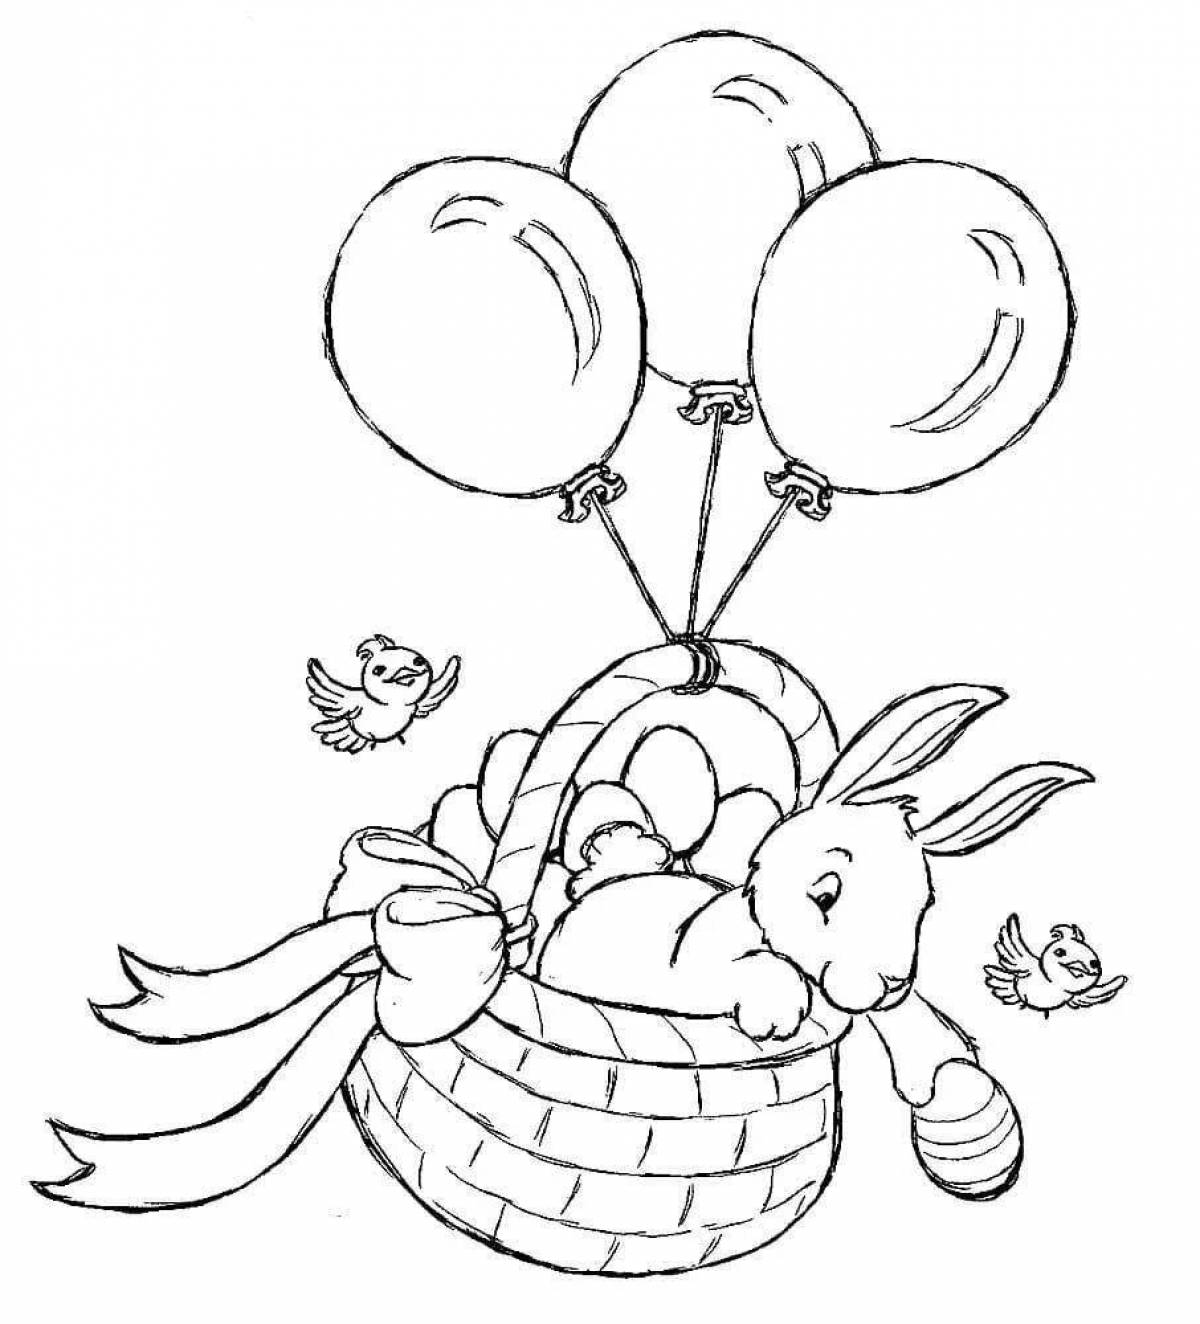 Bright bunny with balloons